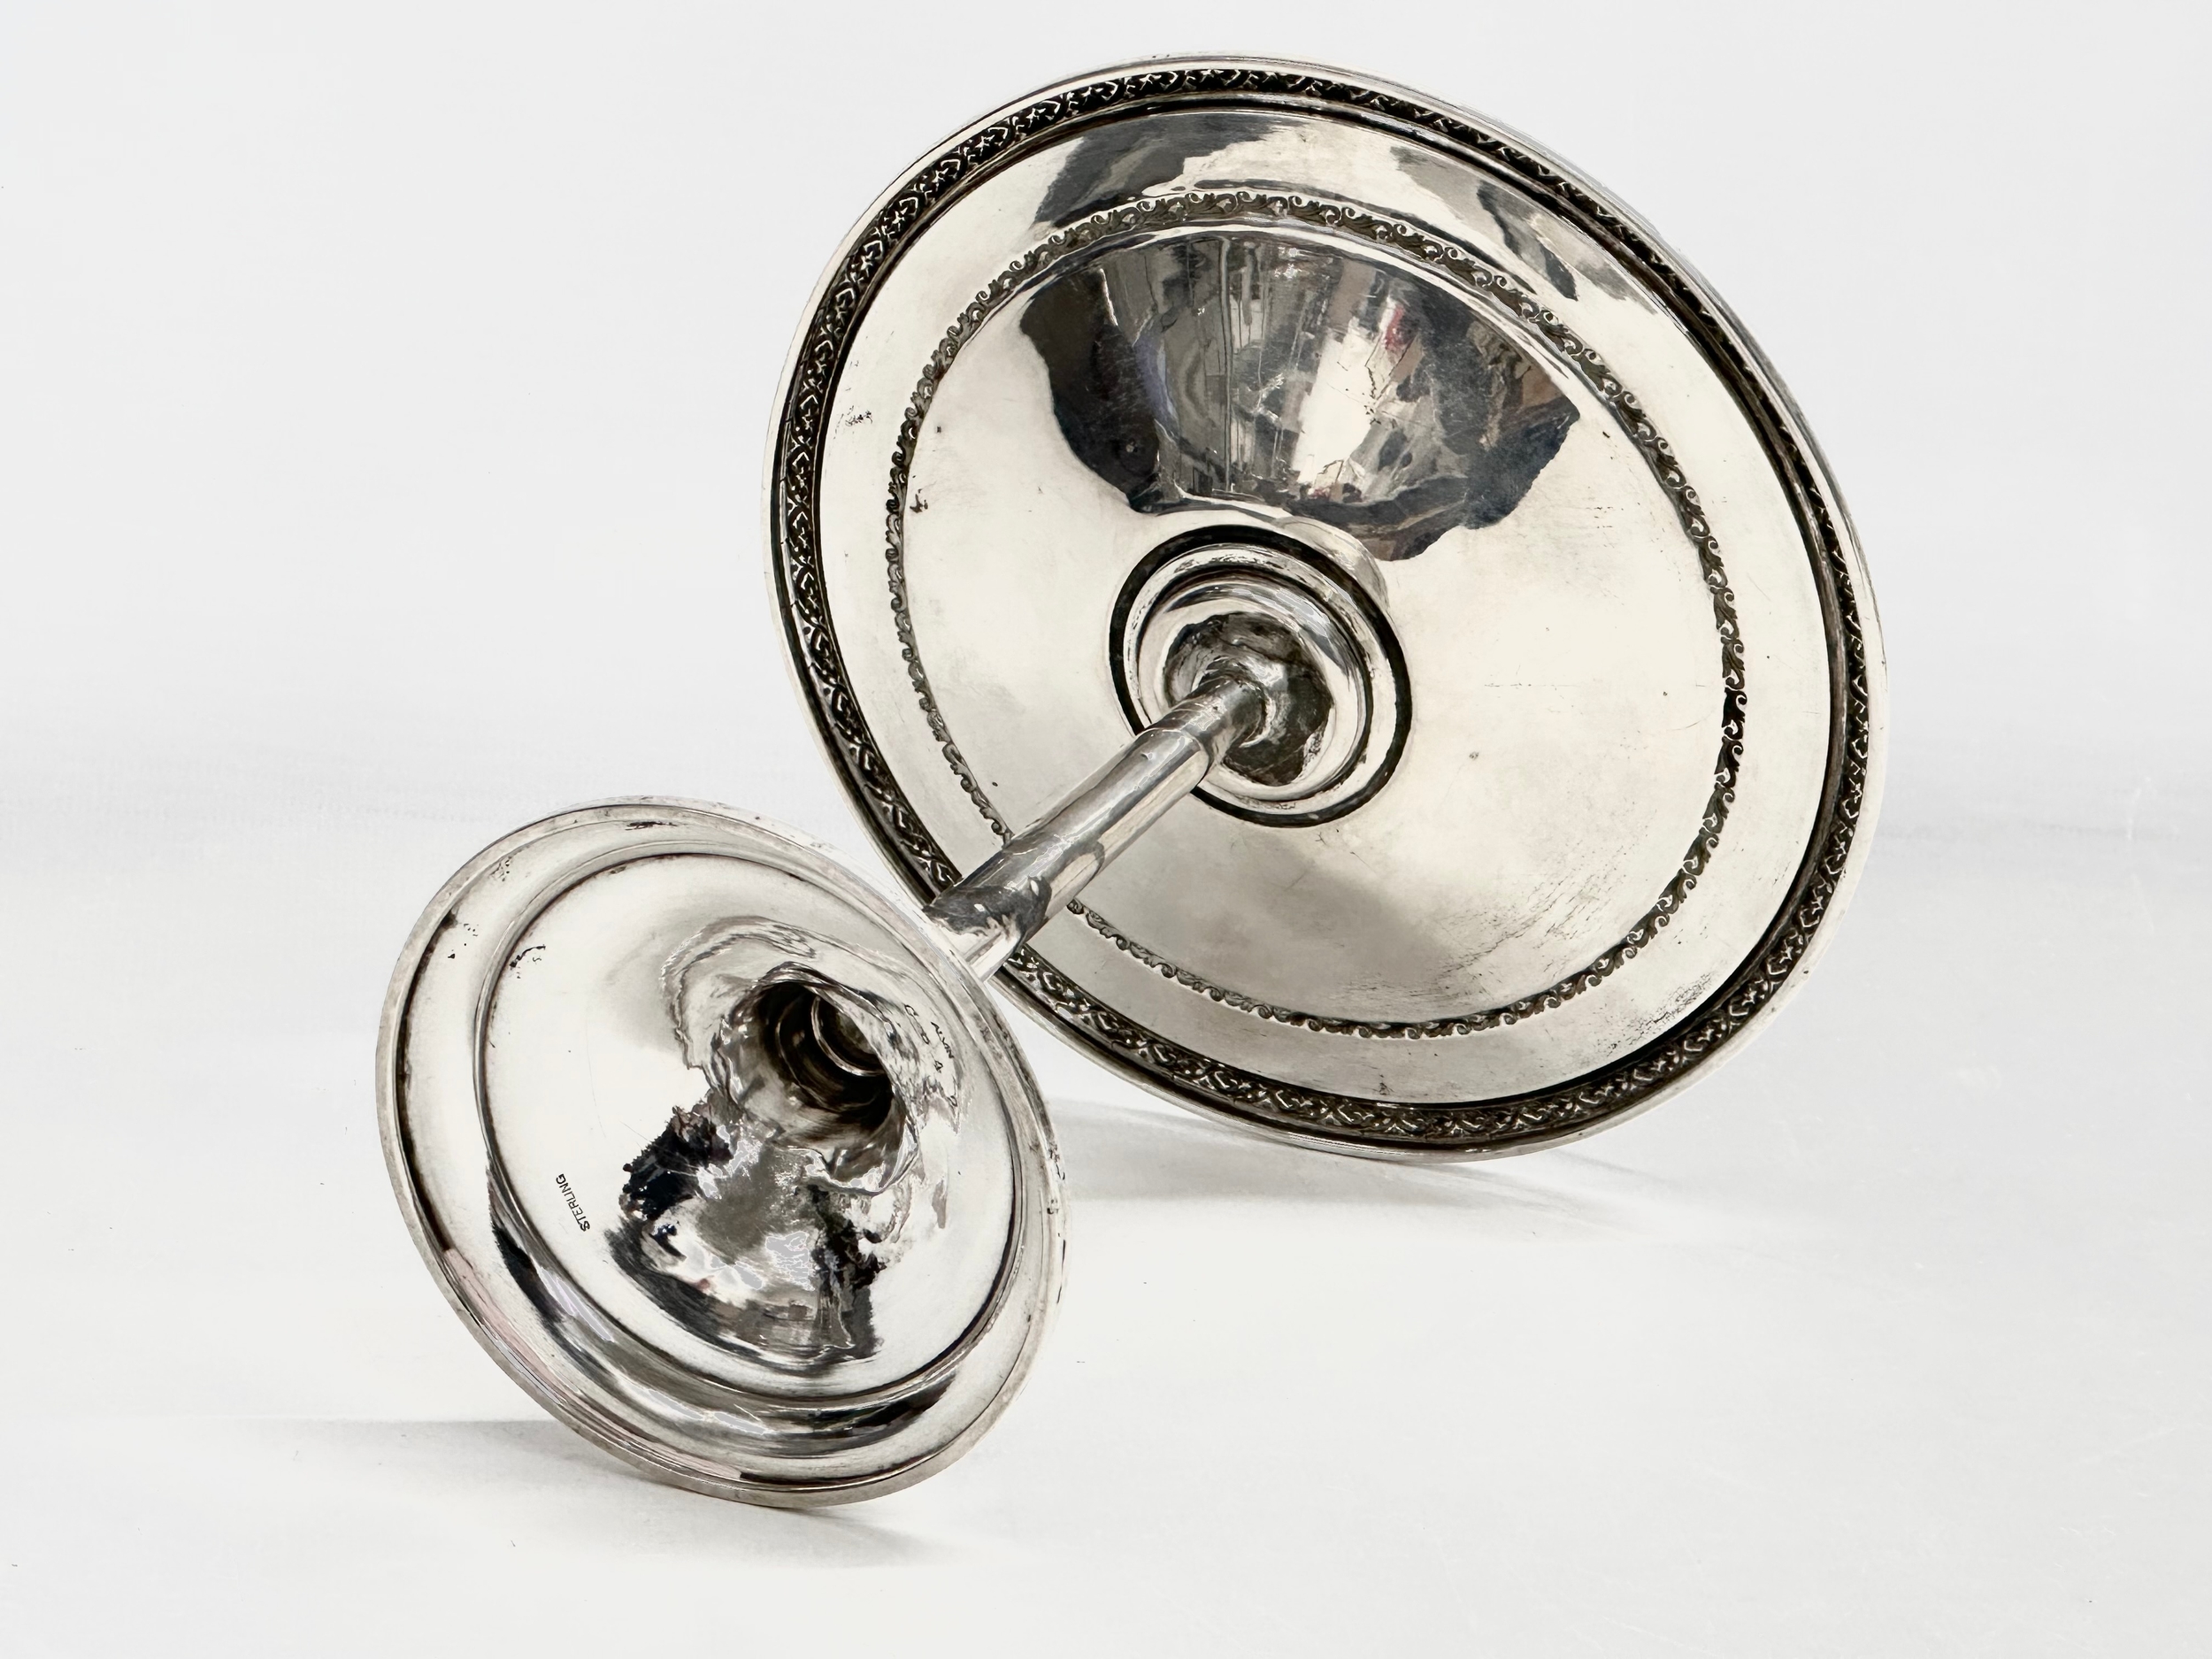 A late 19th/early 20th century sterling silver tazza by Alvin. 15.5x16cm. 128.81 grams. - Image 4 of 6